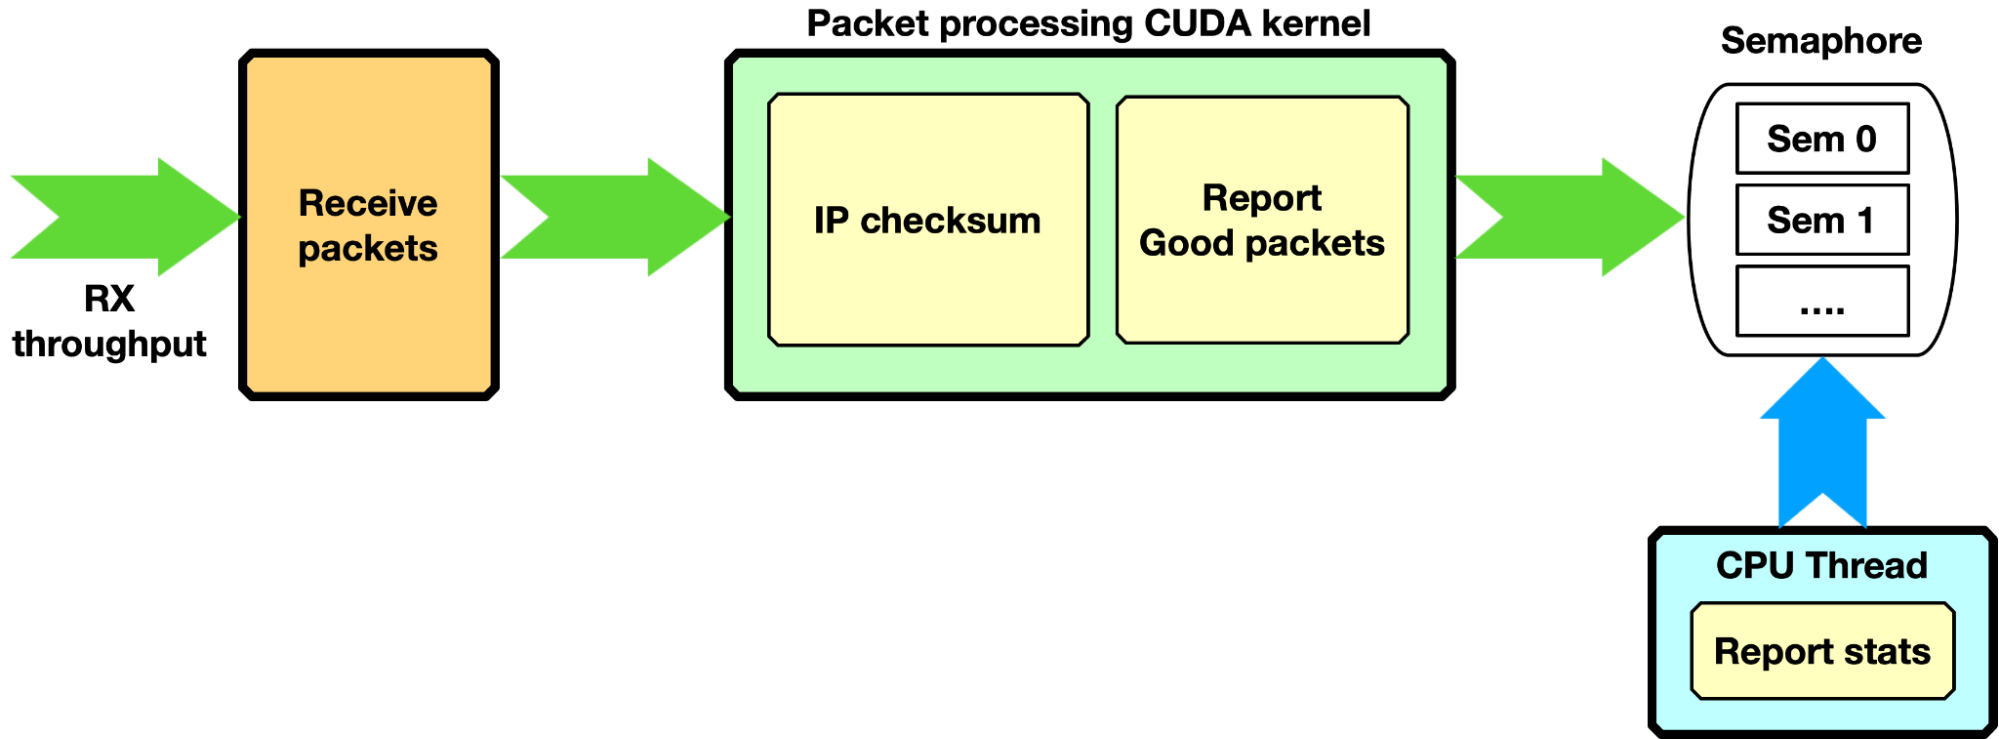 Flow chart showing first pipeline mode in the NVIDIA DOCA GPUNetIO application: GPU receives, calculates IP checksum, and reports to the CPU.